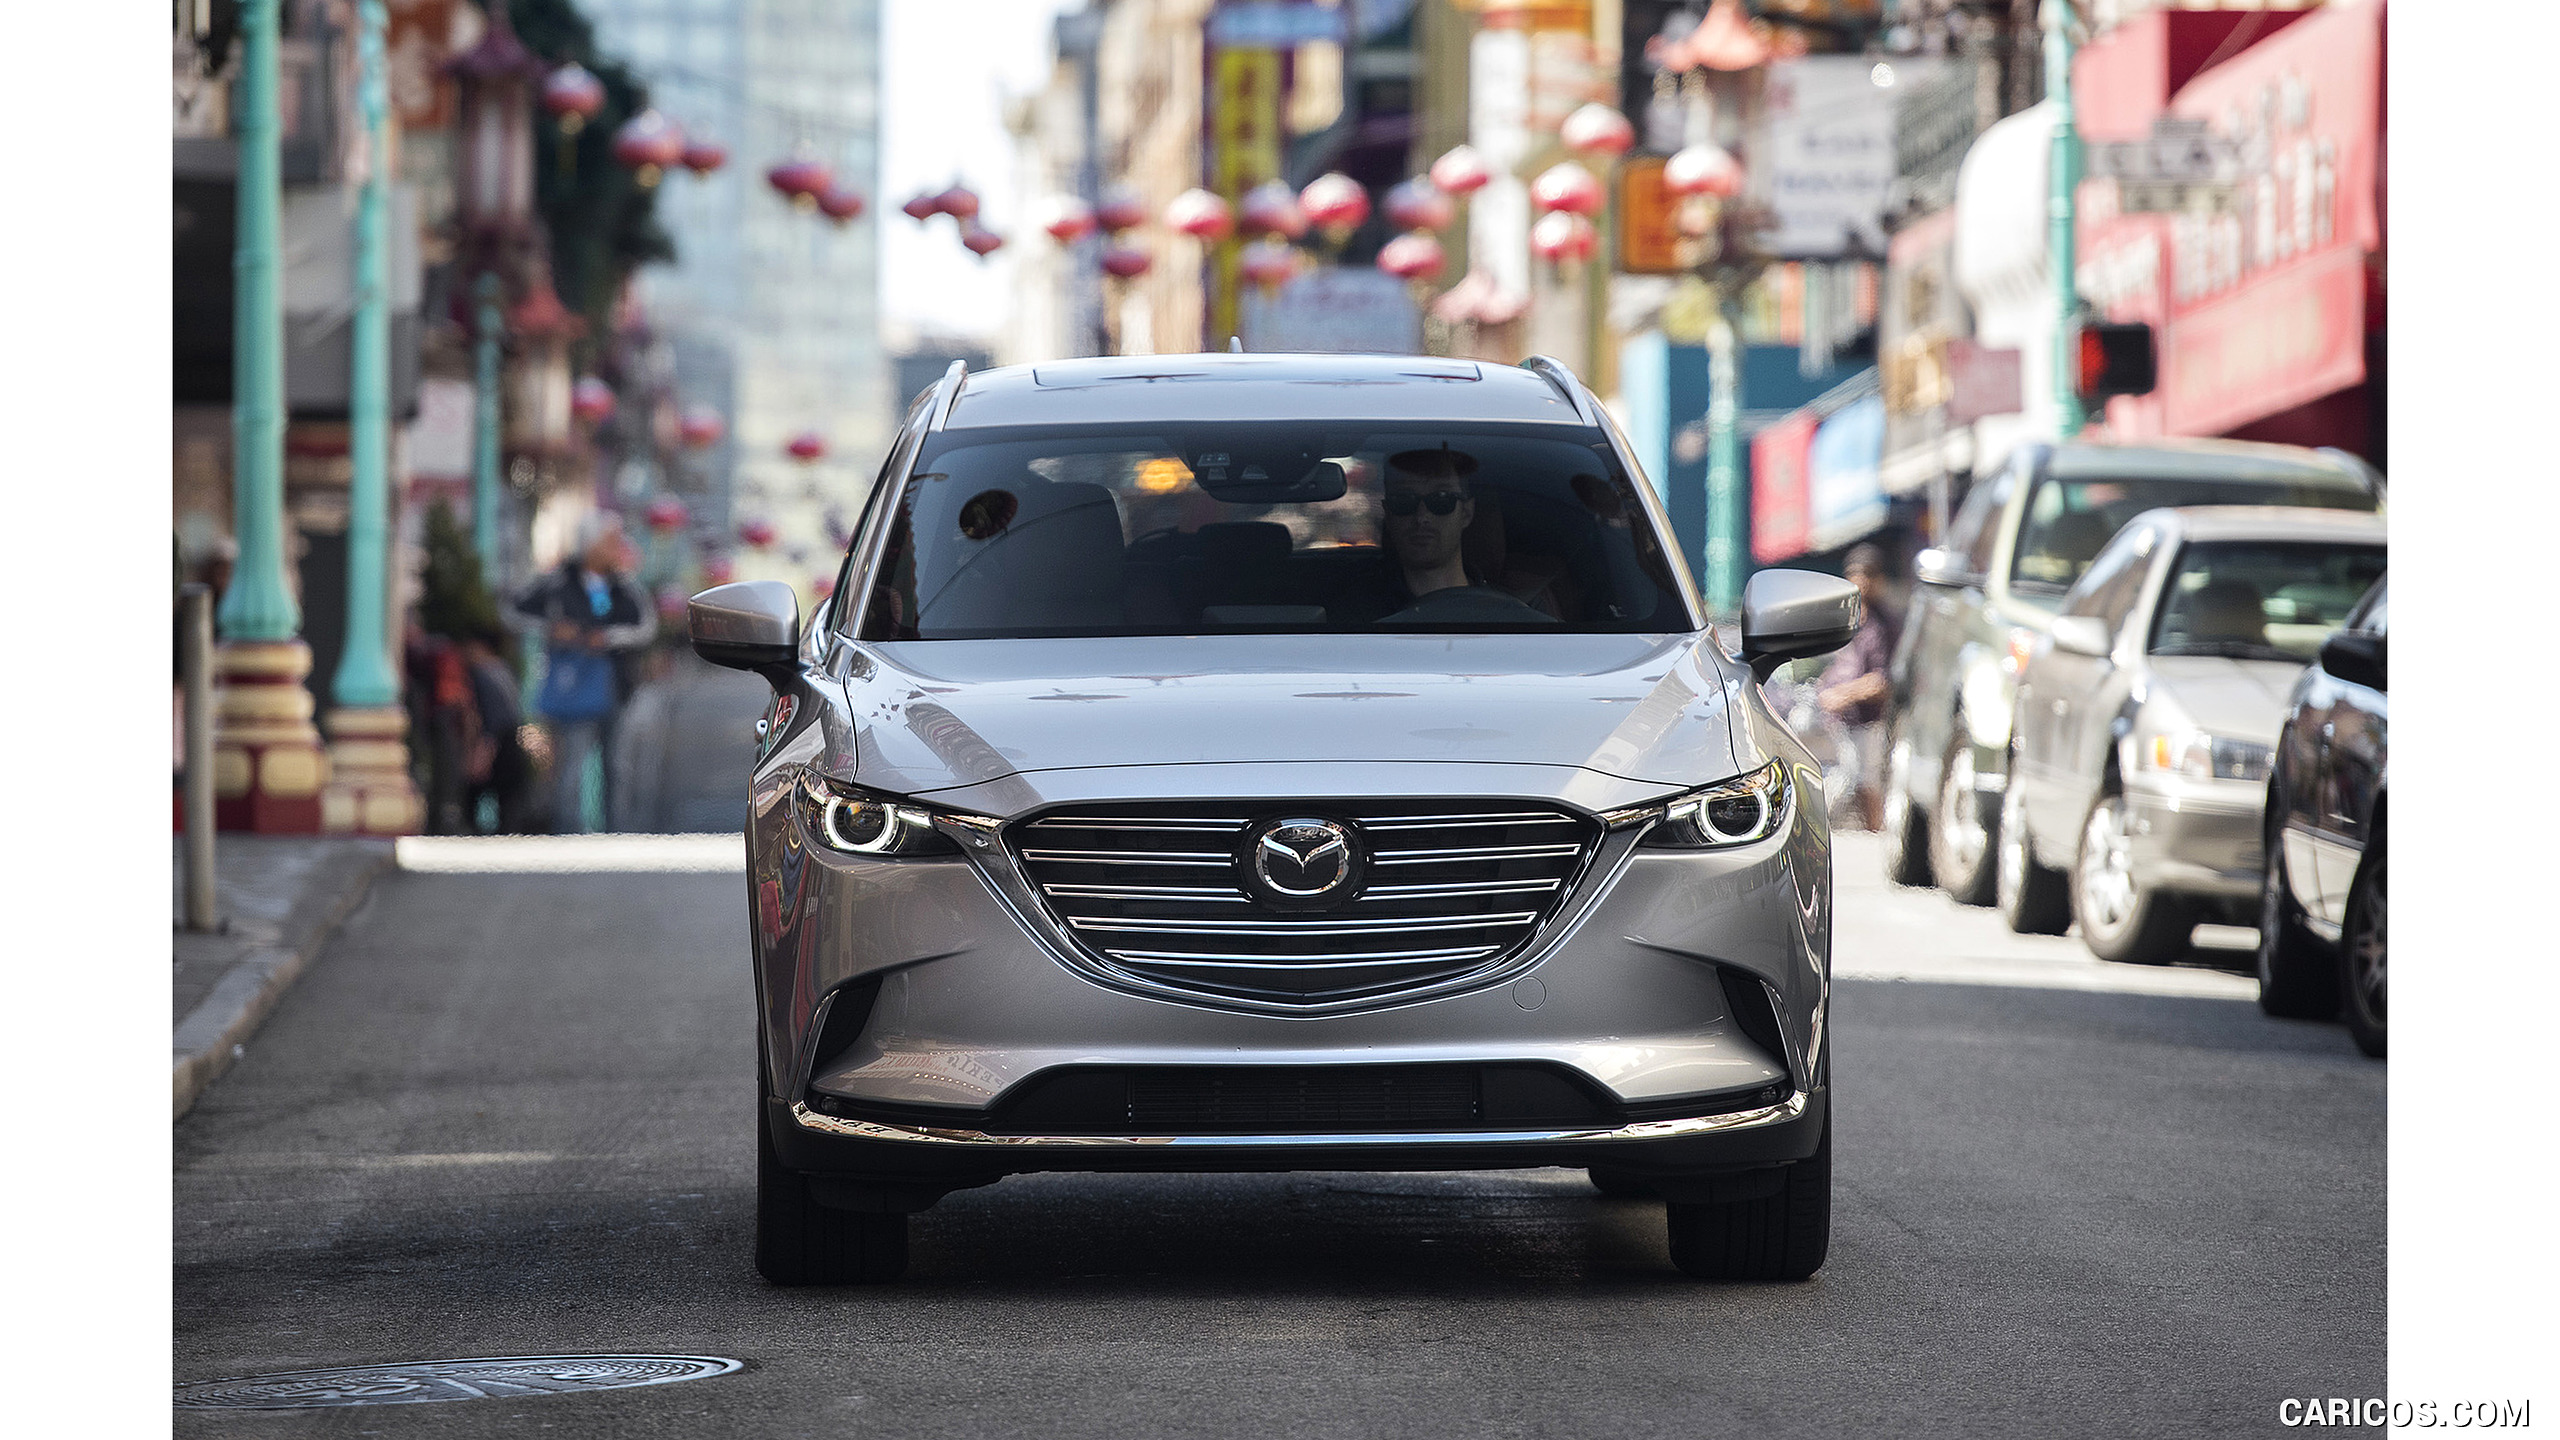 2016 Mazda CX-9 - Front, #36 of 69